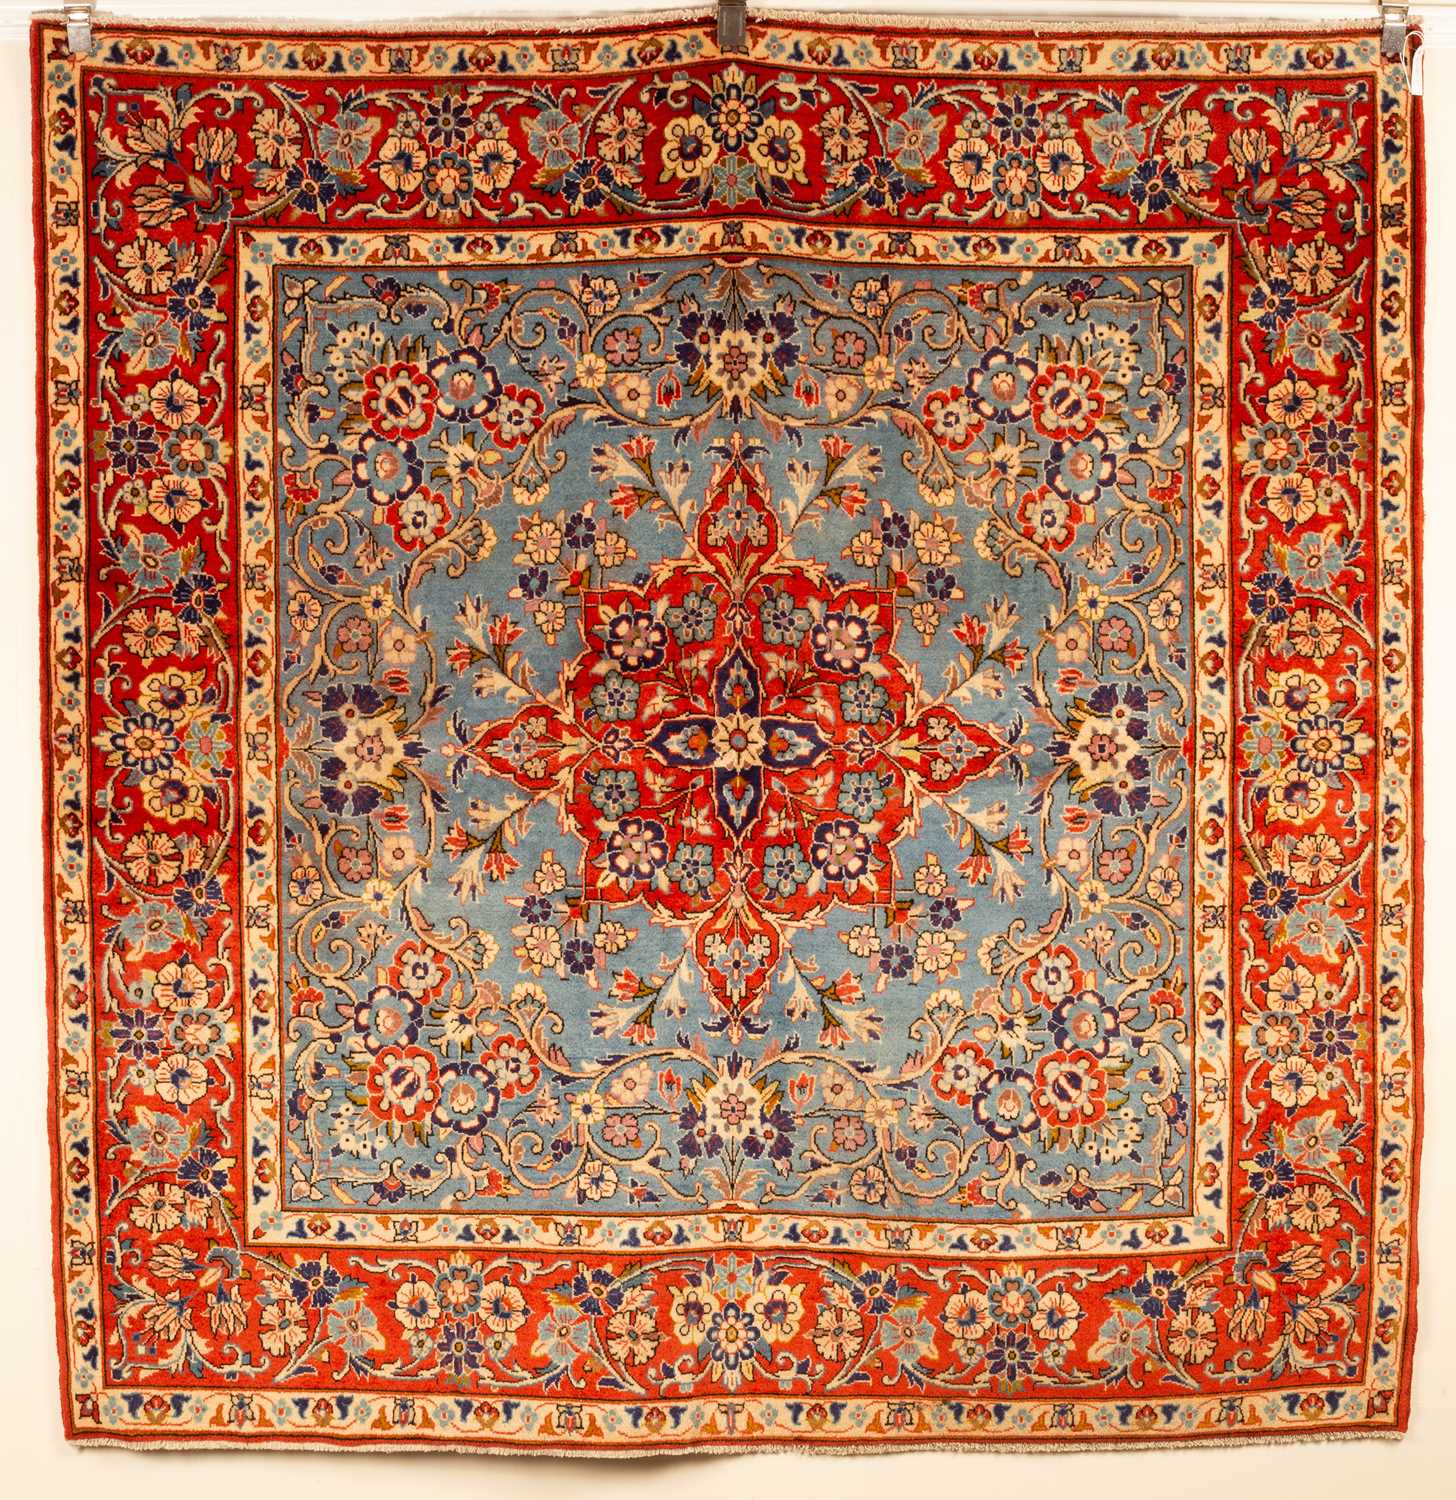 An Isfahan rug of unusual square size